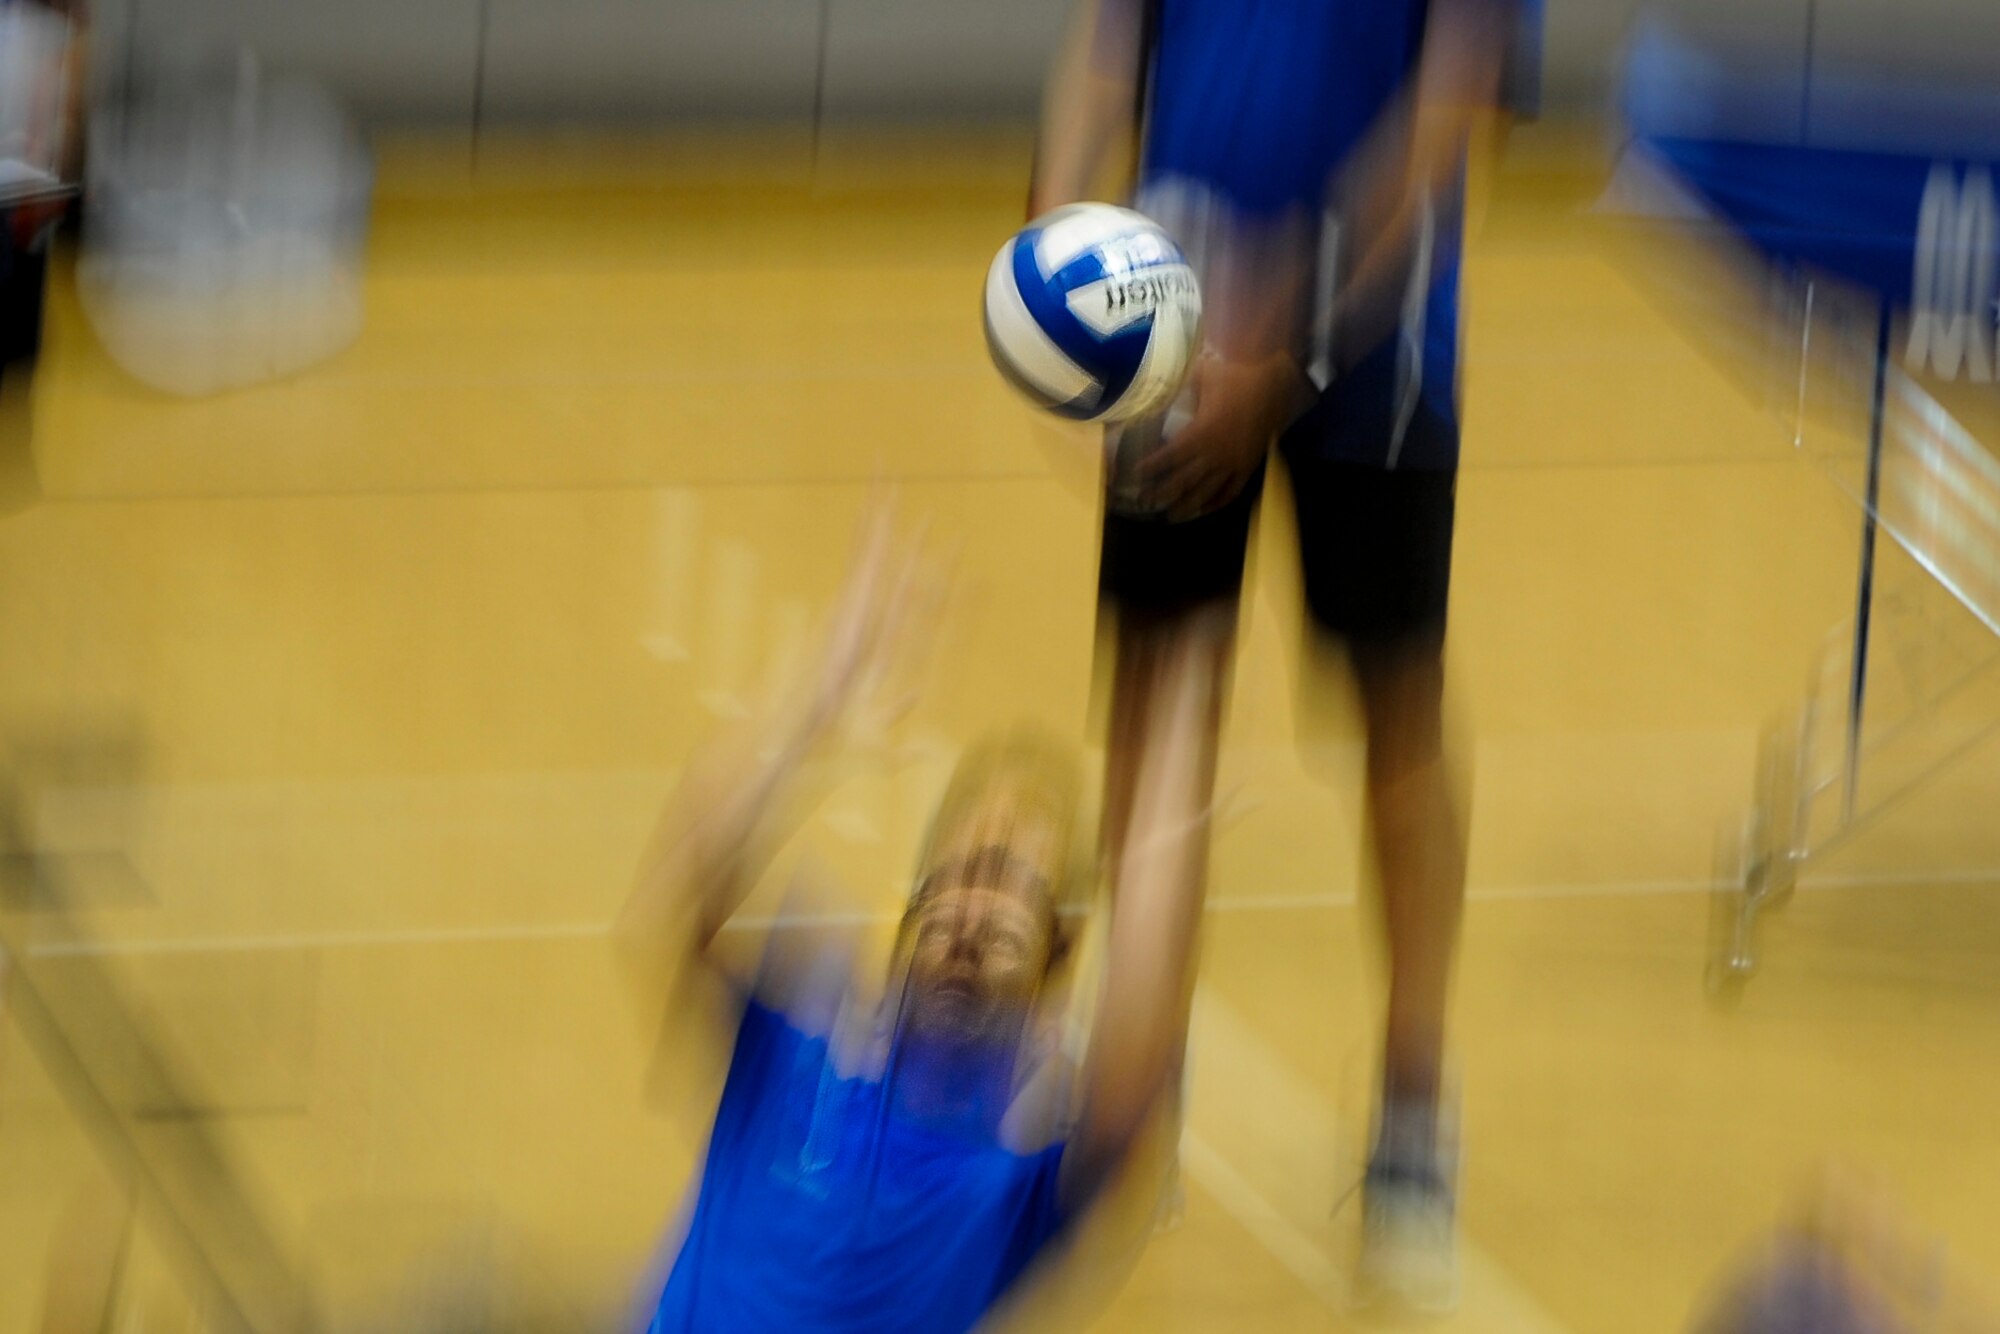 Keary Gwinn, a member of the Air Force sitting volleyball team, sets the volleyball during a scrimmage at Hurlburt Field, Fla., April 24, 2017. The scrimmage was part of training before their annual competition in June. (U.S. Air Force photo by Airman 1st Class Dennis Spain)